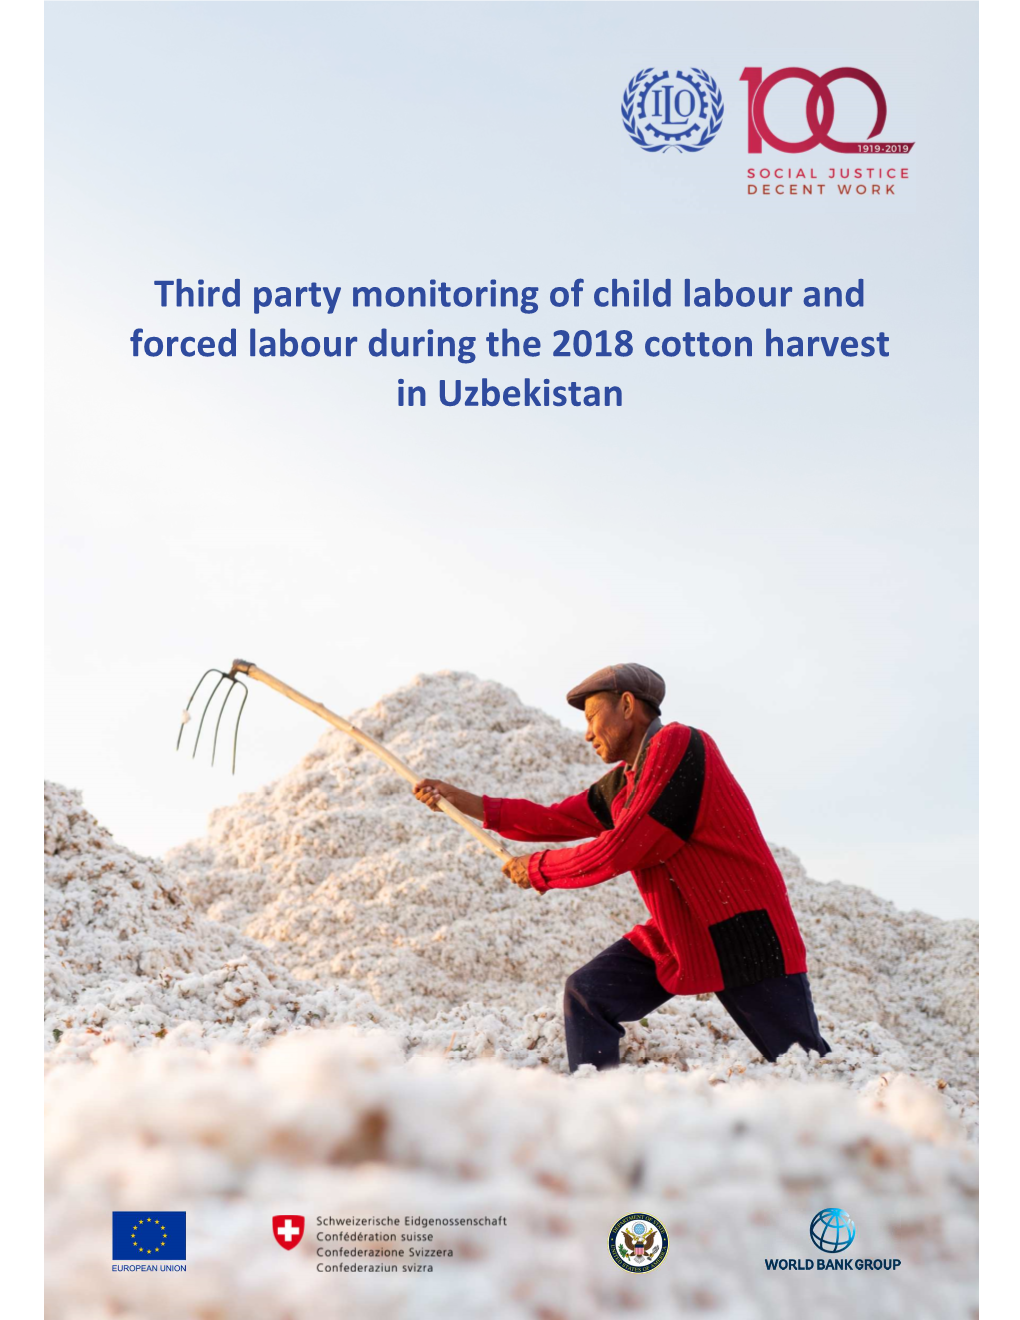 Third Party Monitoring of Child Labour & Forced Labour During the 2018 Cotton Harvest in Uzbekistan